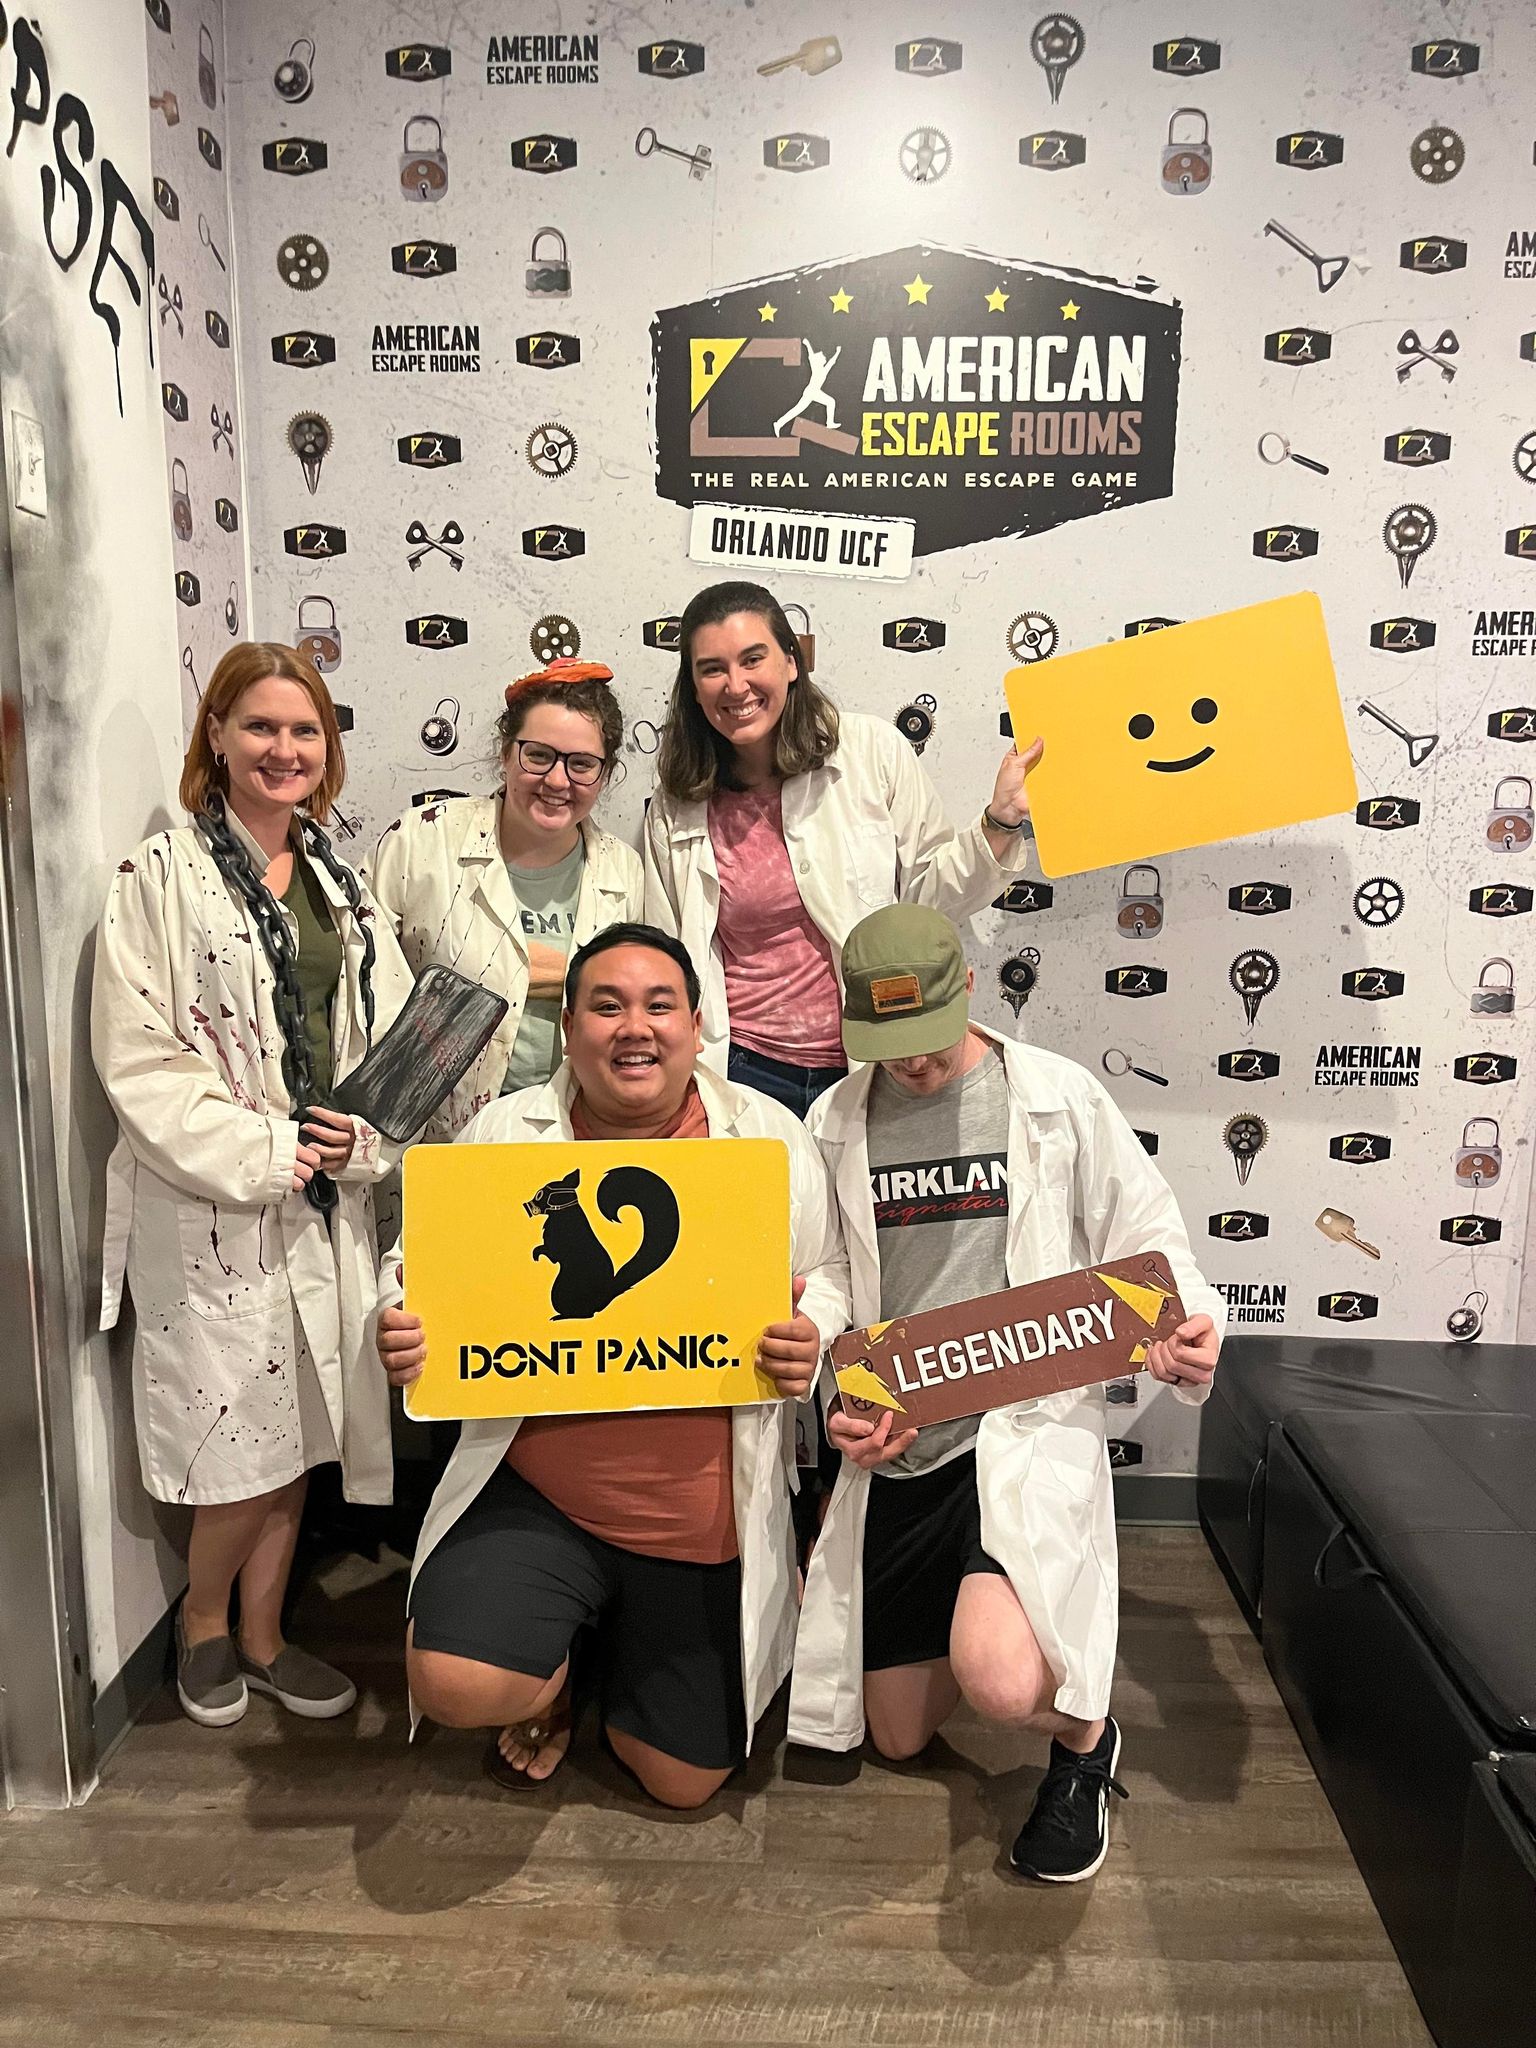 Team Bobby-less played the Mad Professor's Asylum - Orlando and finished the game with 17 minutes 23 seconds left. Congratulations! Well done!